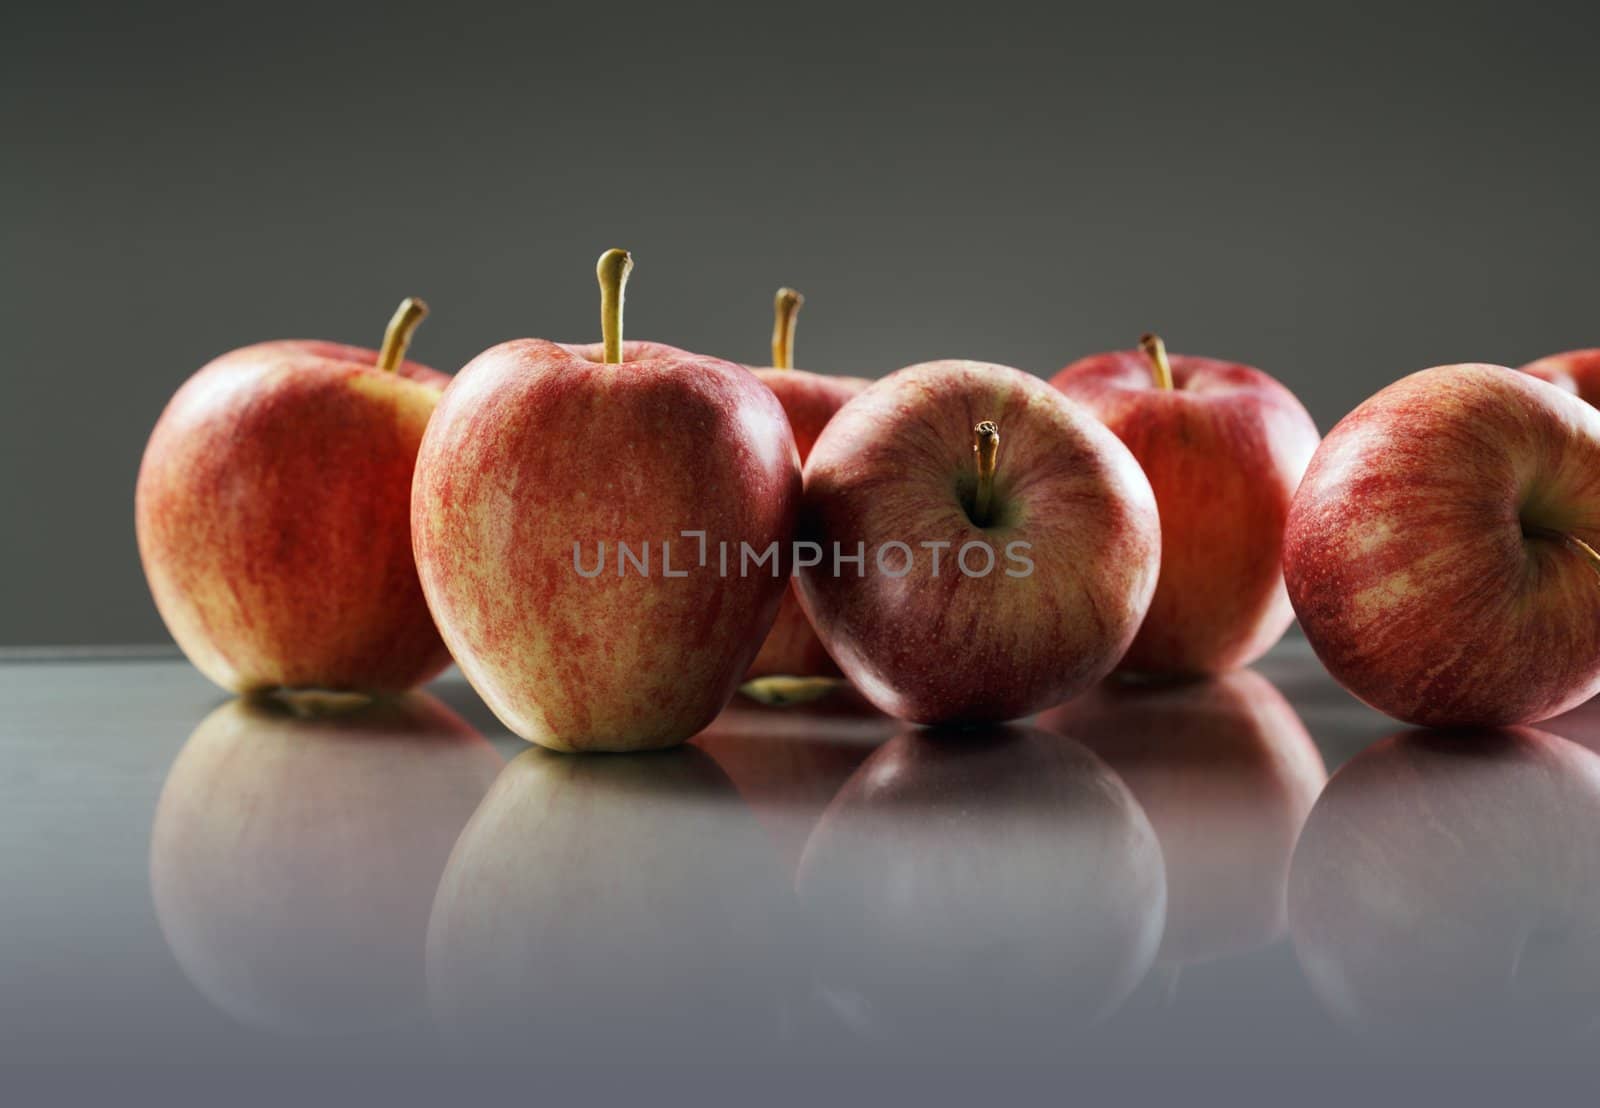 Apples by Stocksnapper